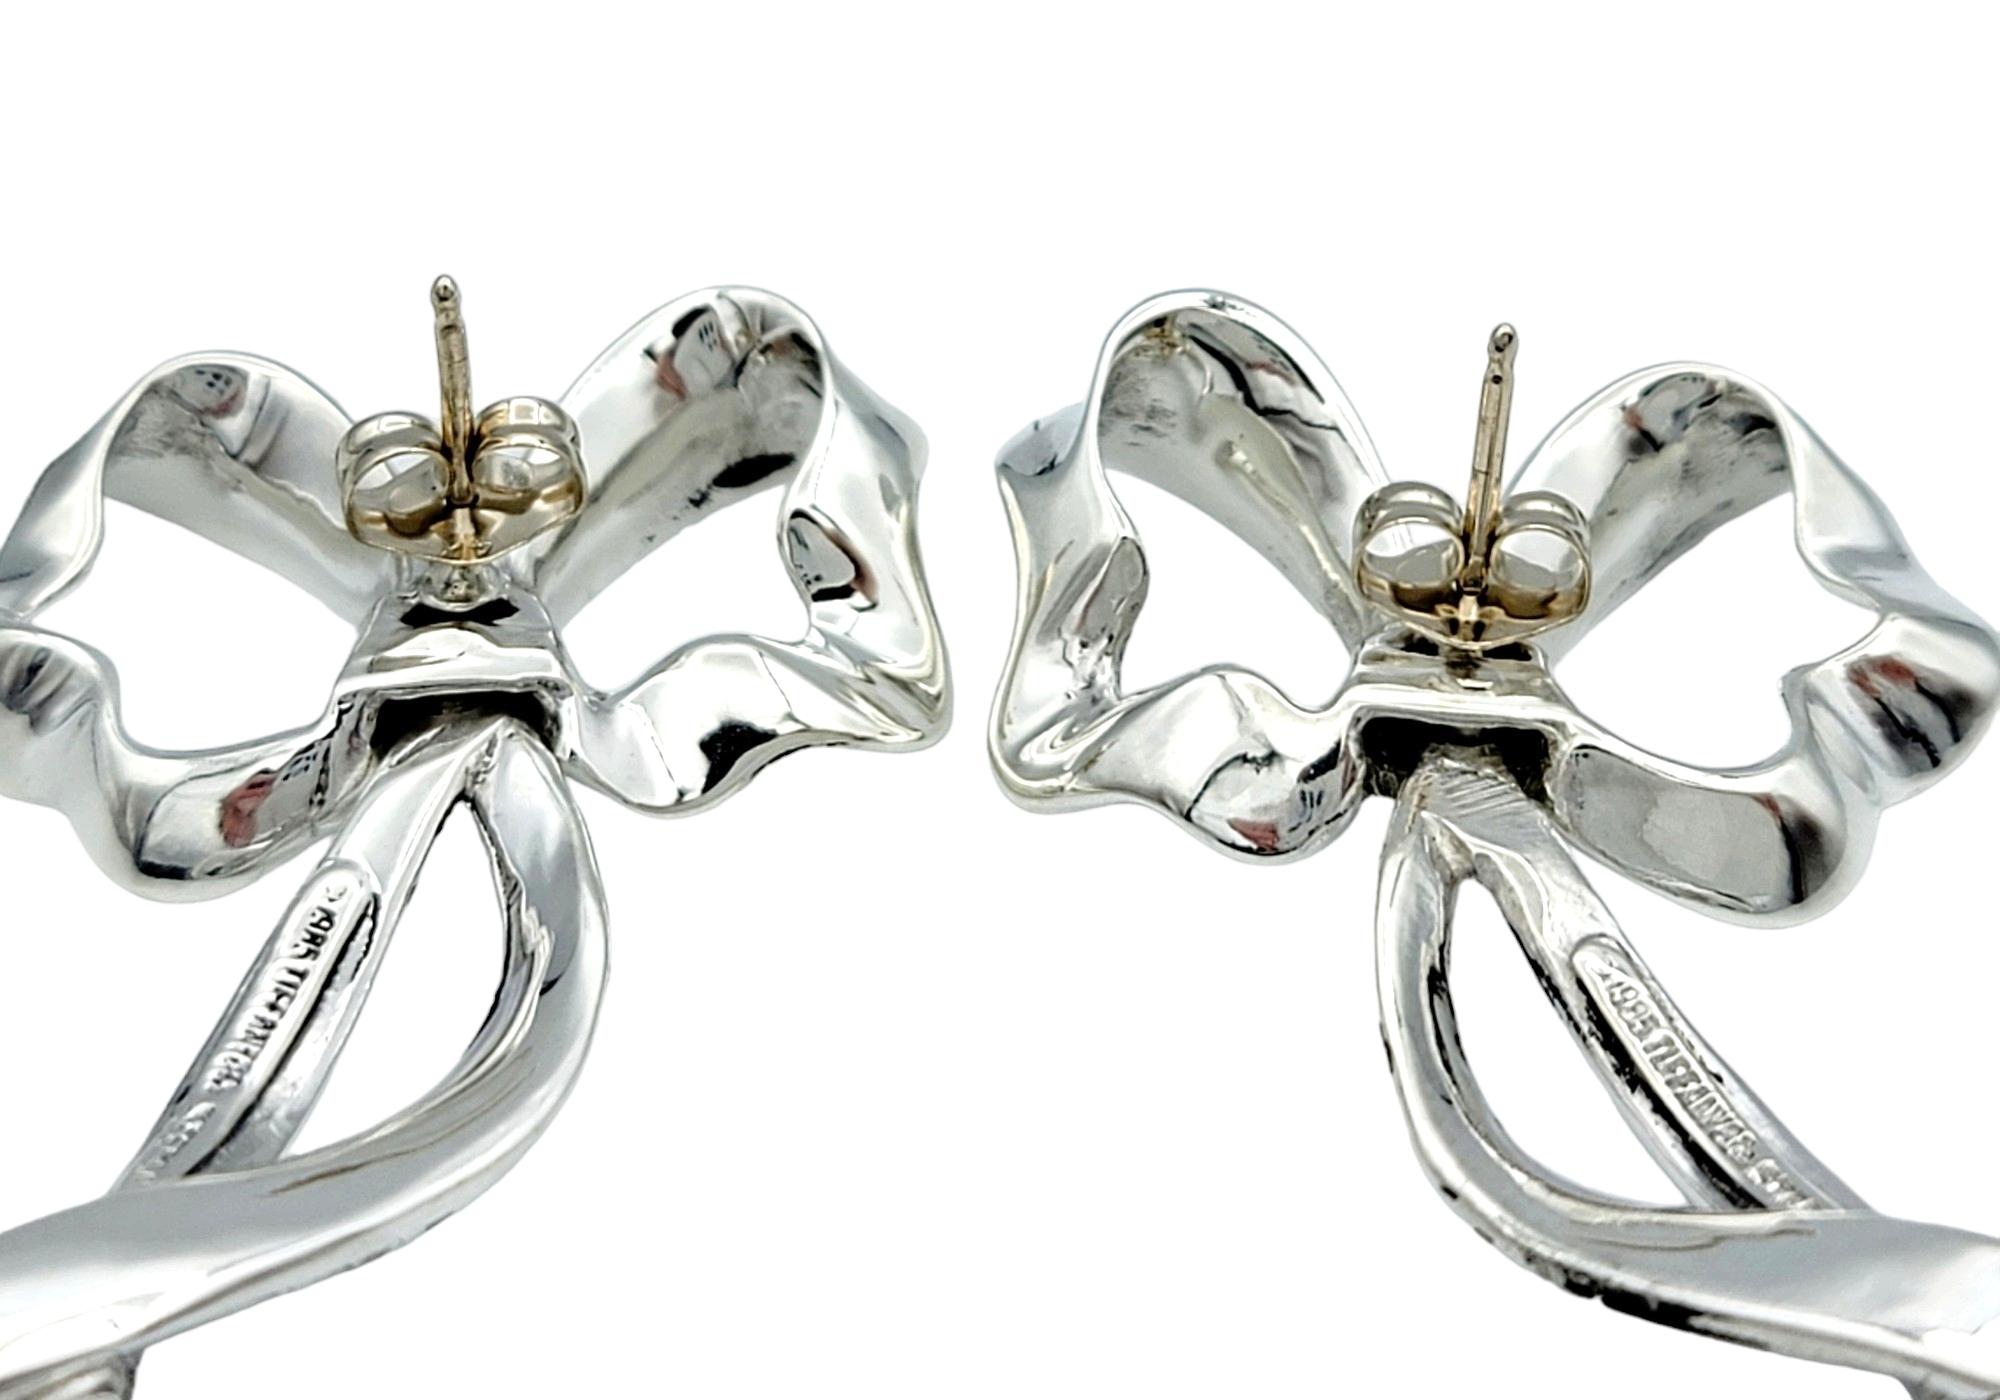 Vintage Tiffany & Co. Large Ribbon Bow Earrings Set in Polished Sterling Silver In Good Condition For Sale In Scottsdale, AZ